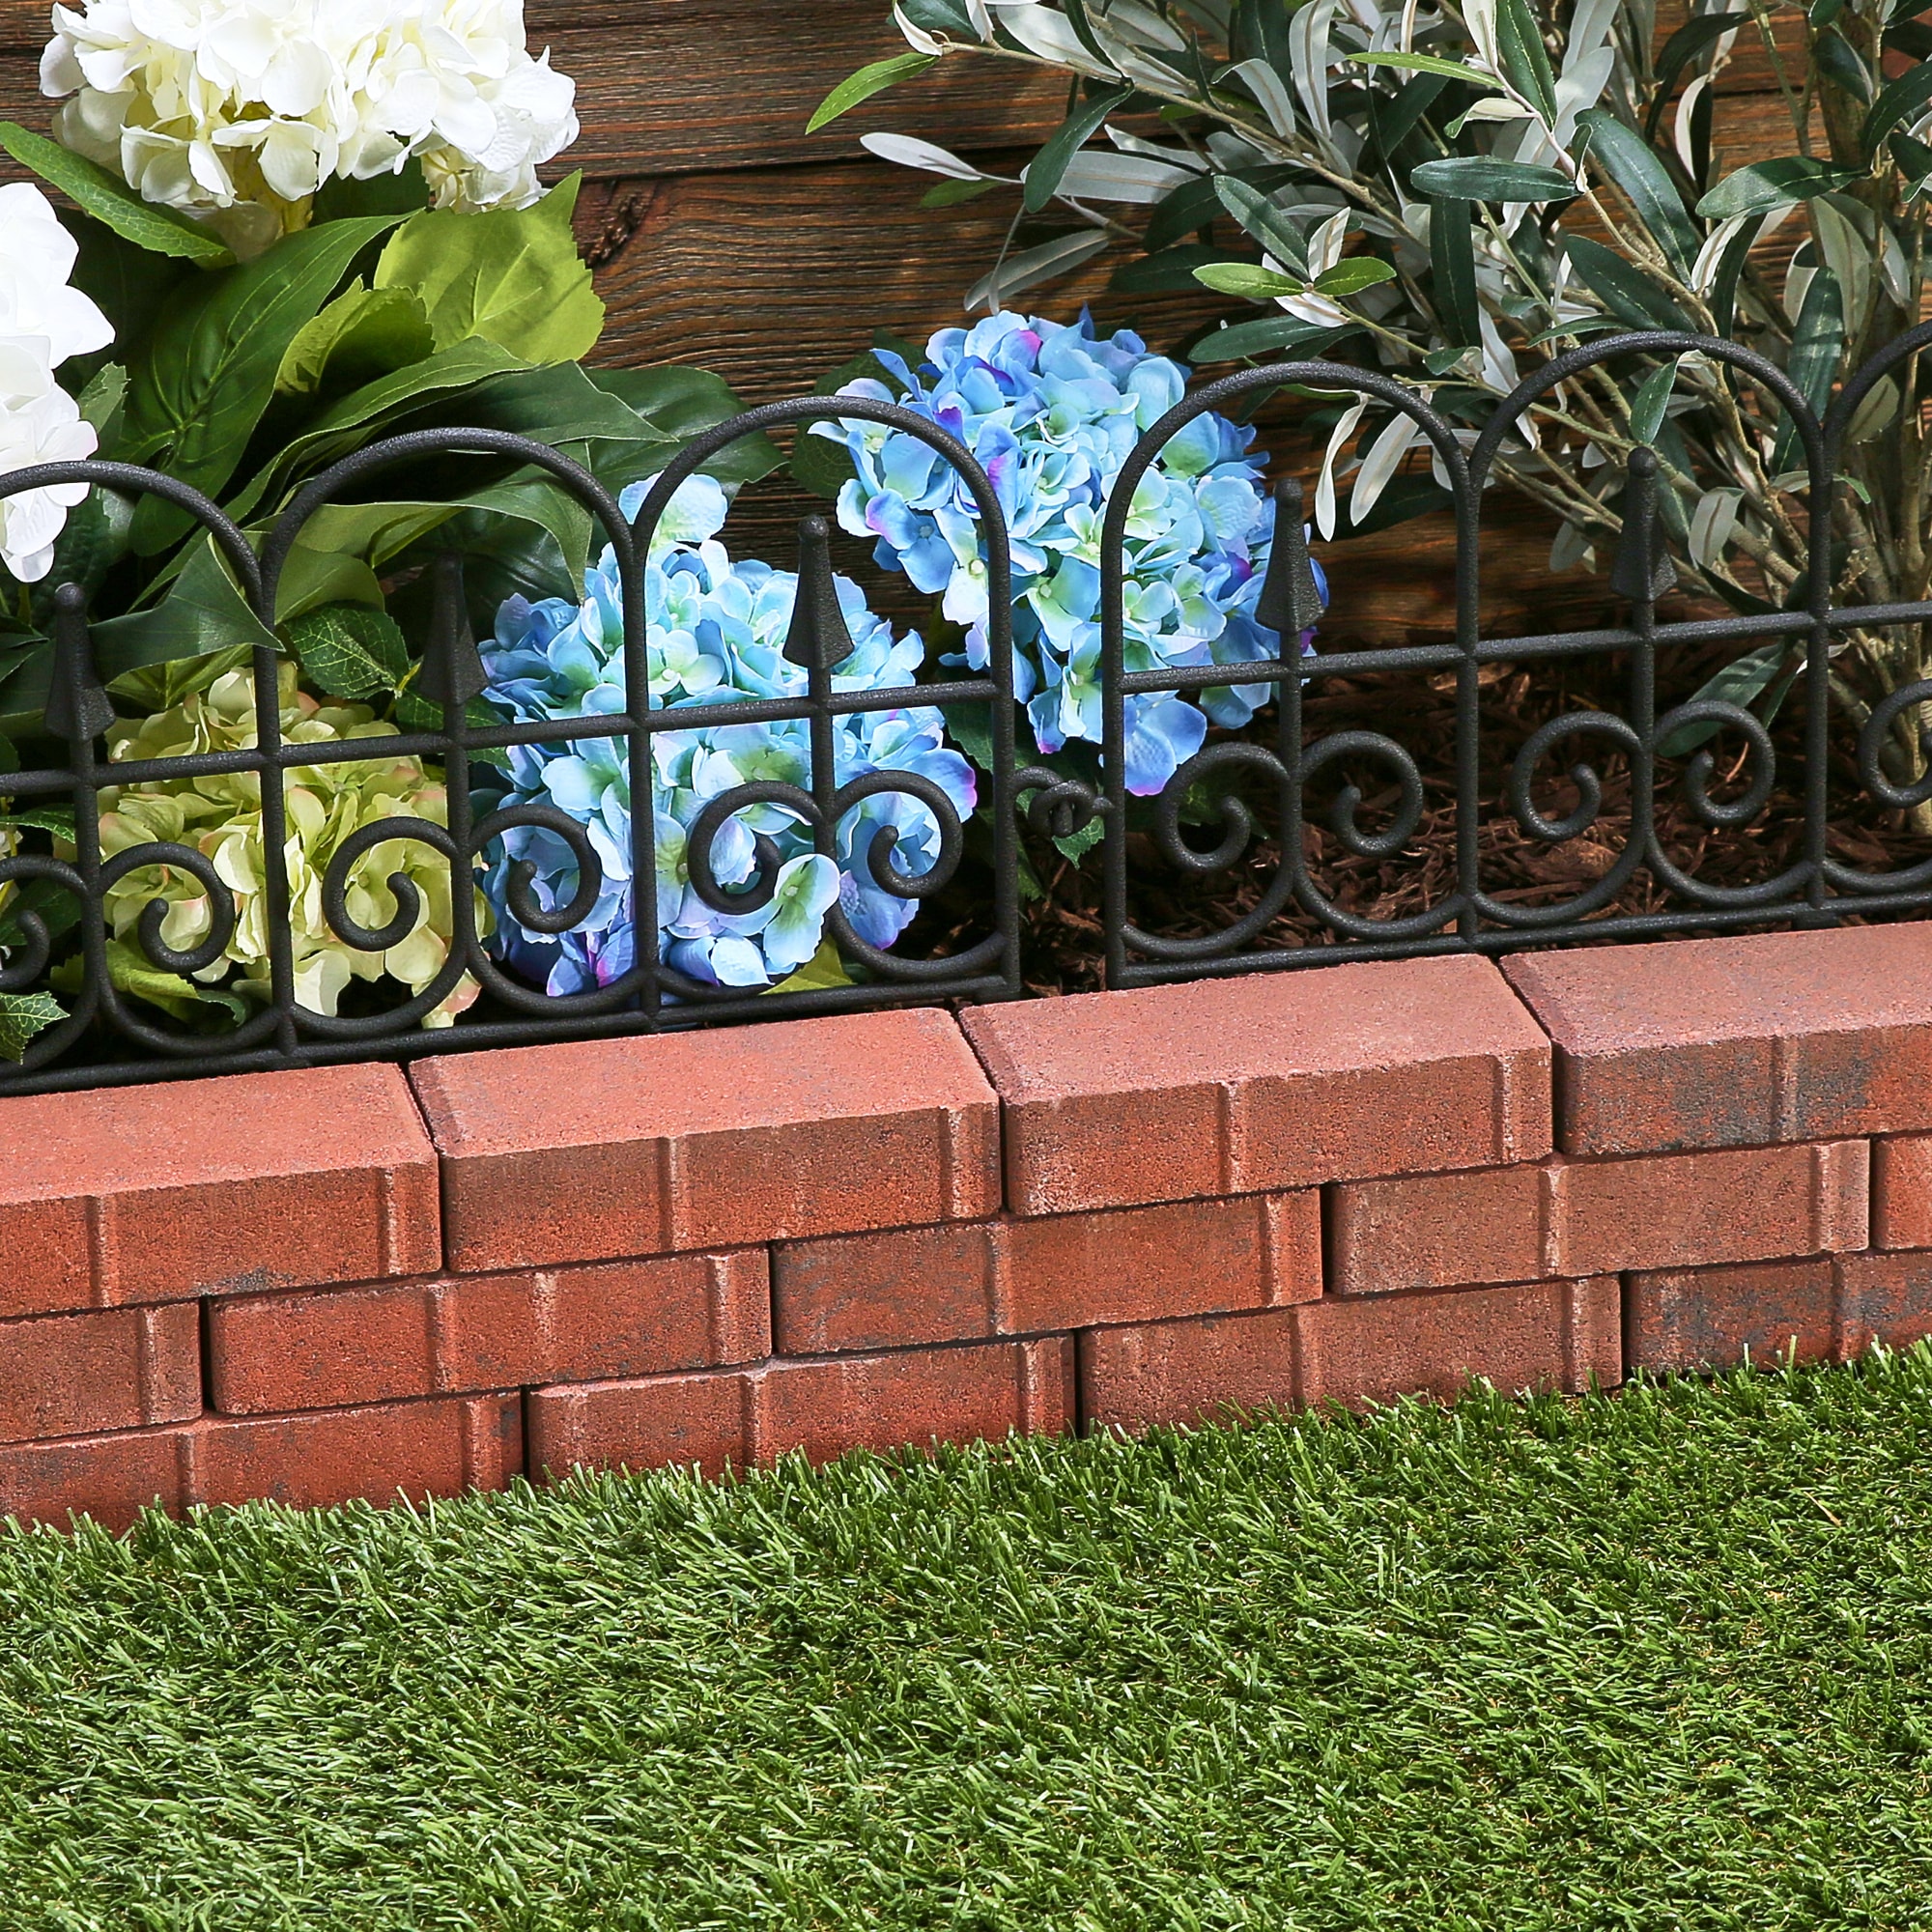 6 Foot Long Solar Powered Faux Red Brick Garden Edging Border Fence Panels 